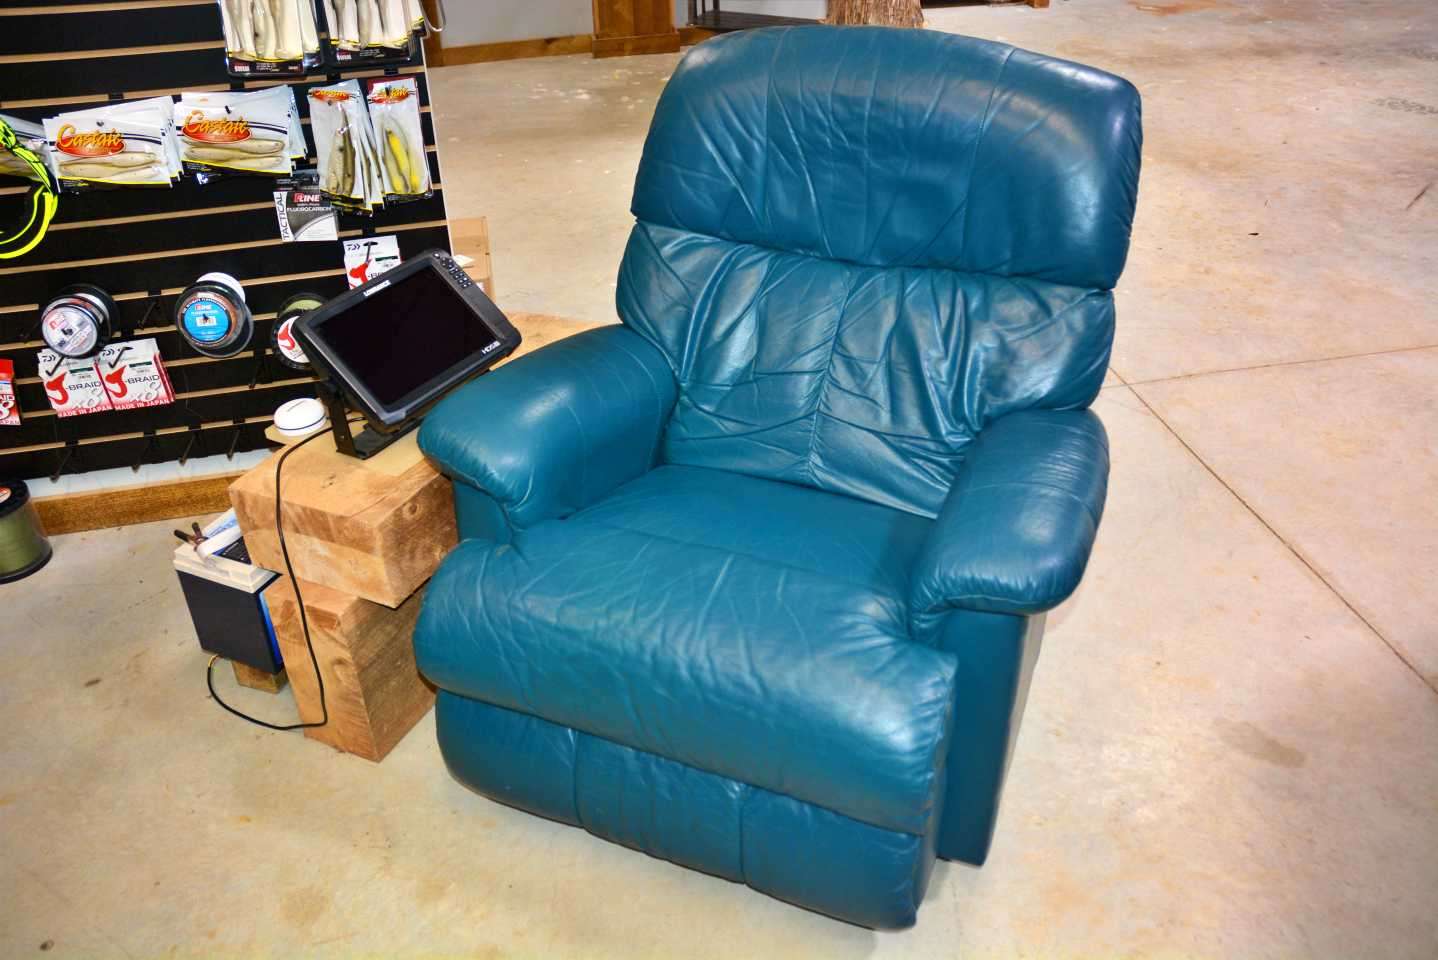 Every man cave has a recliner and this one is no different. But Gross does more than kick back and watch TV in this chair. 